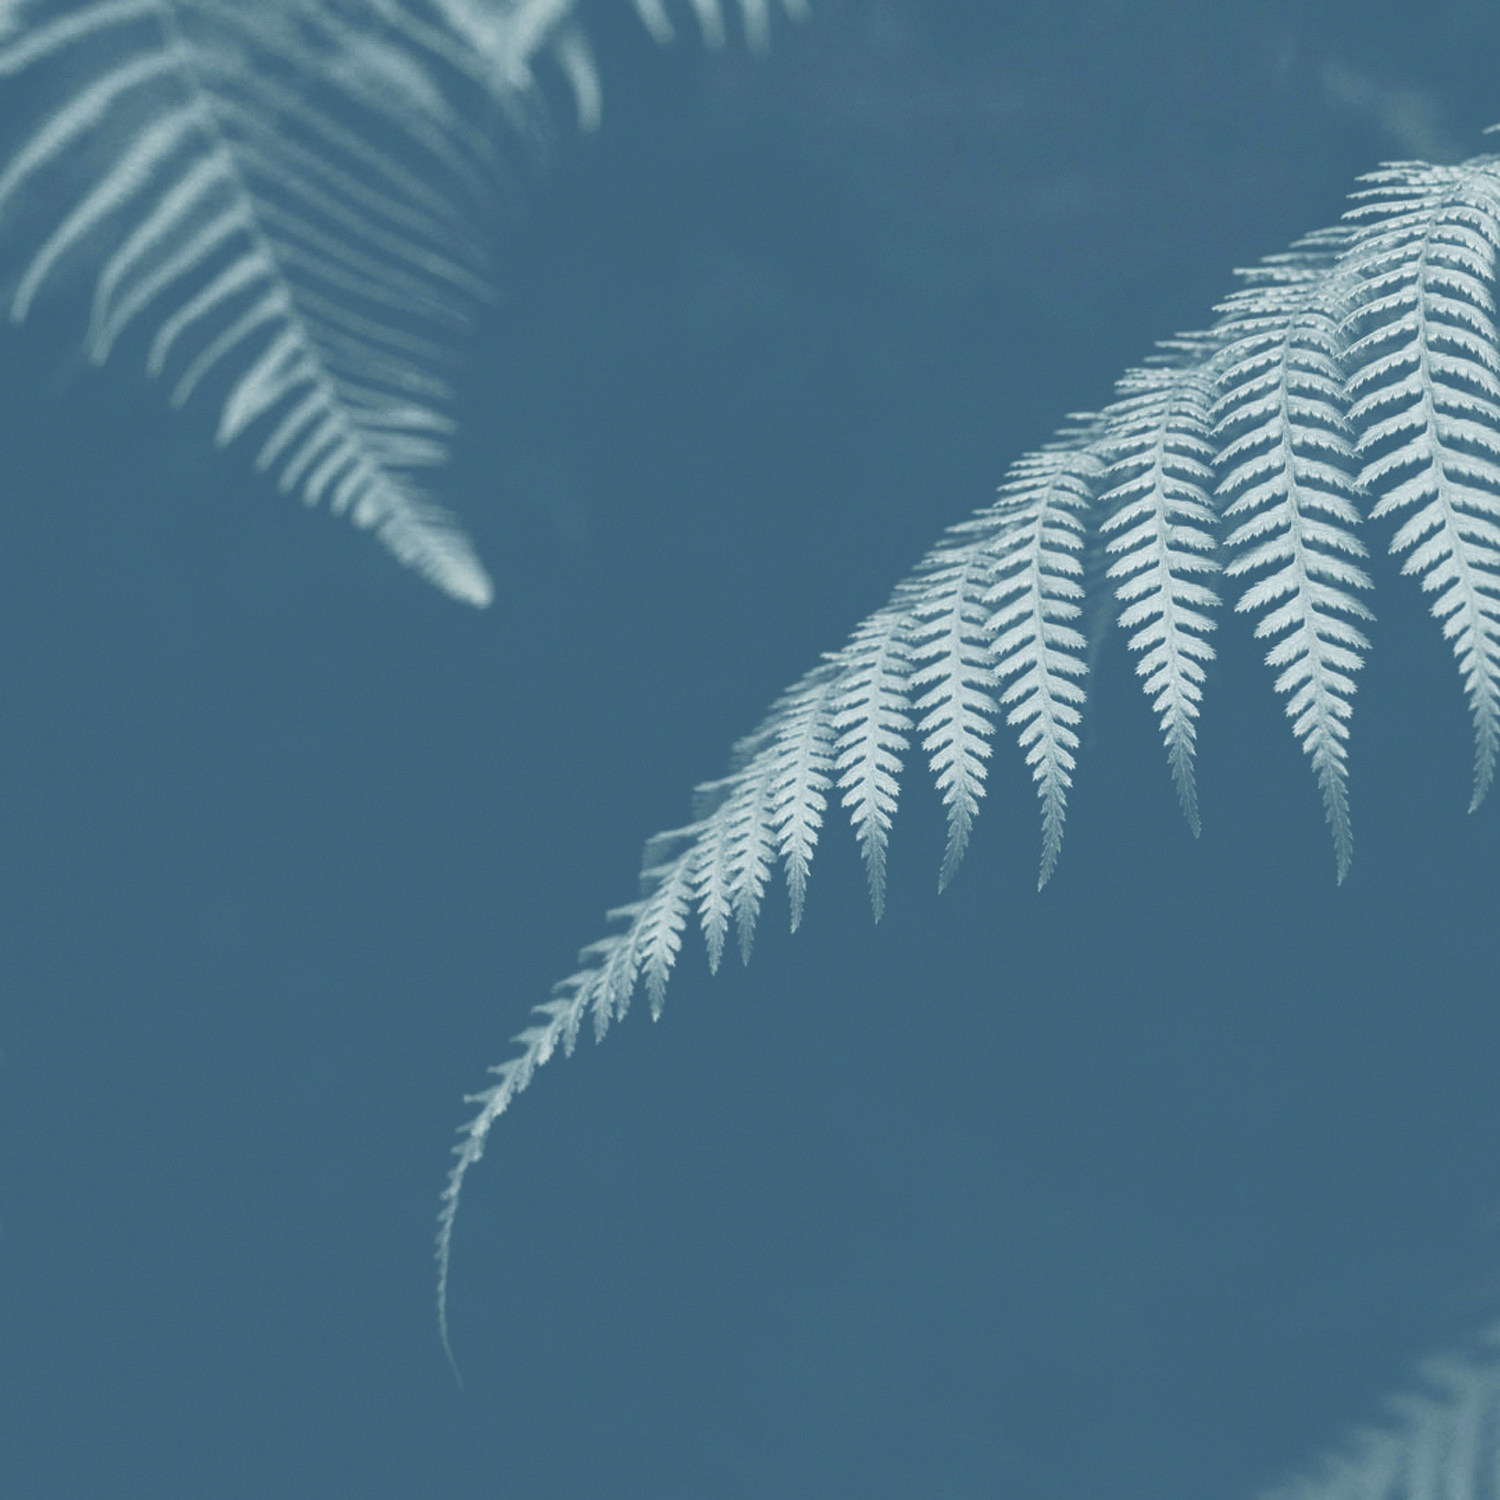 Duotone image for Akoako that shows a fern